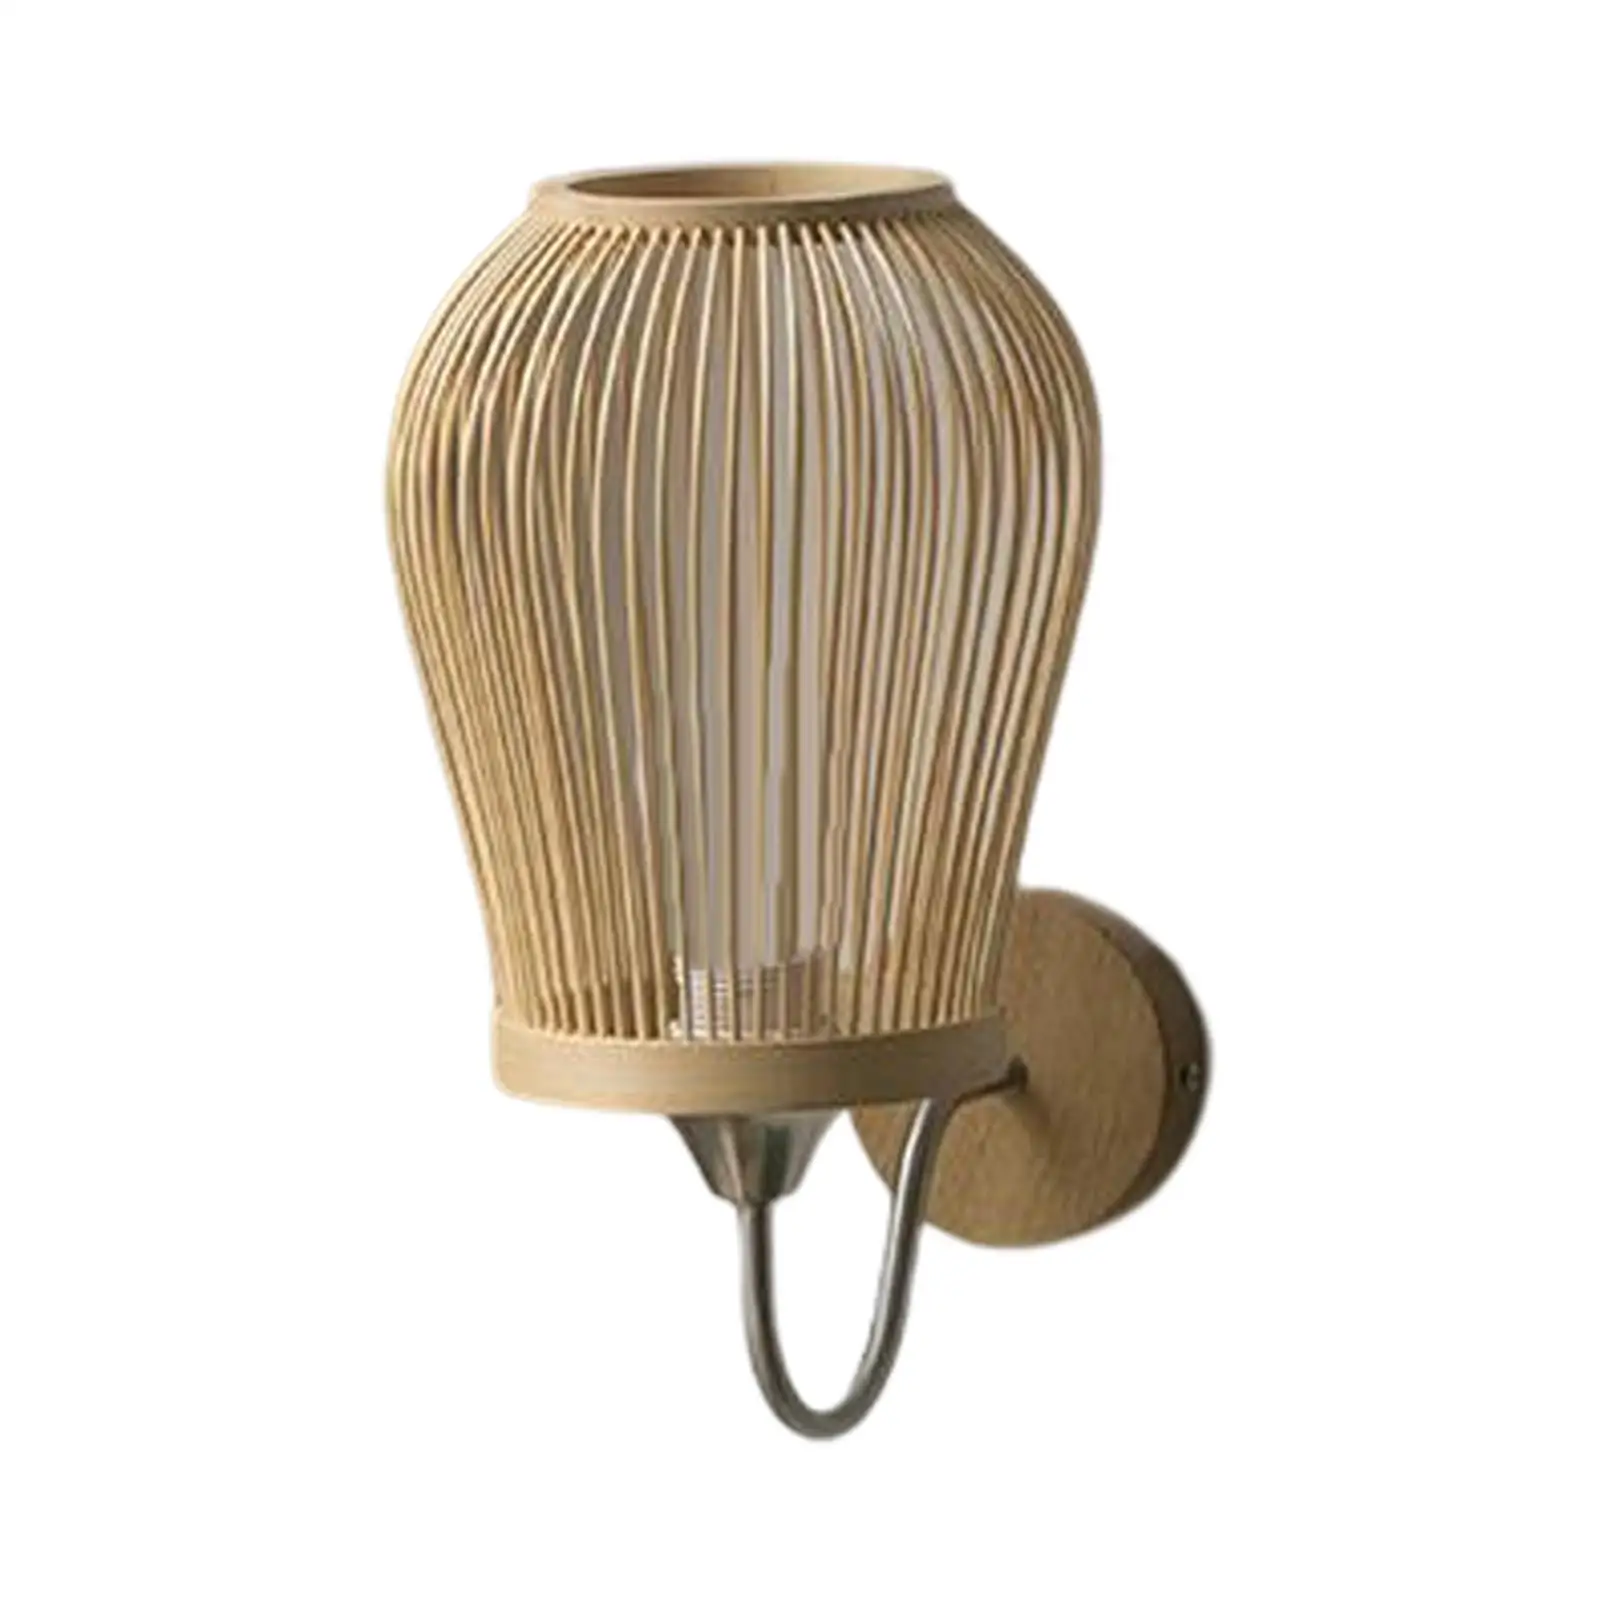 Bamboo Wall Mount Sconce Lamp Light Retro Style E27 Base Farmhouse Lighting for Indoor Living Room Home Decoration